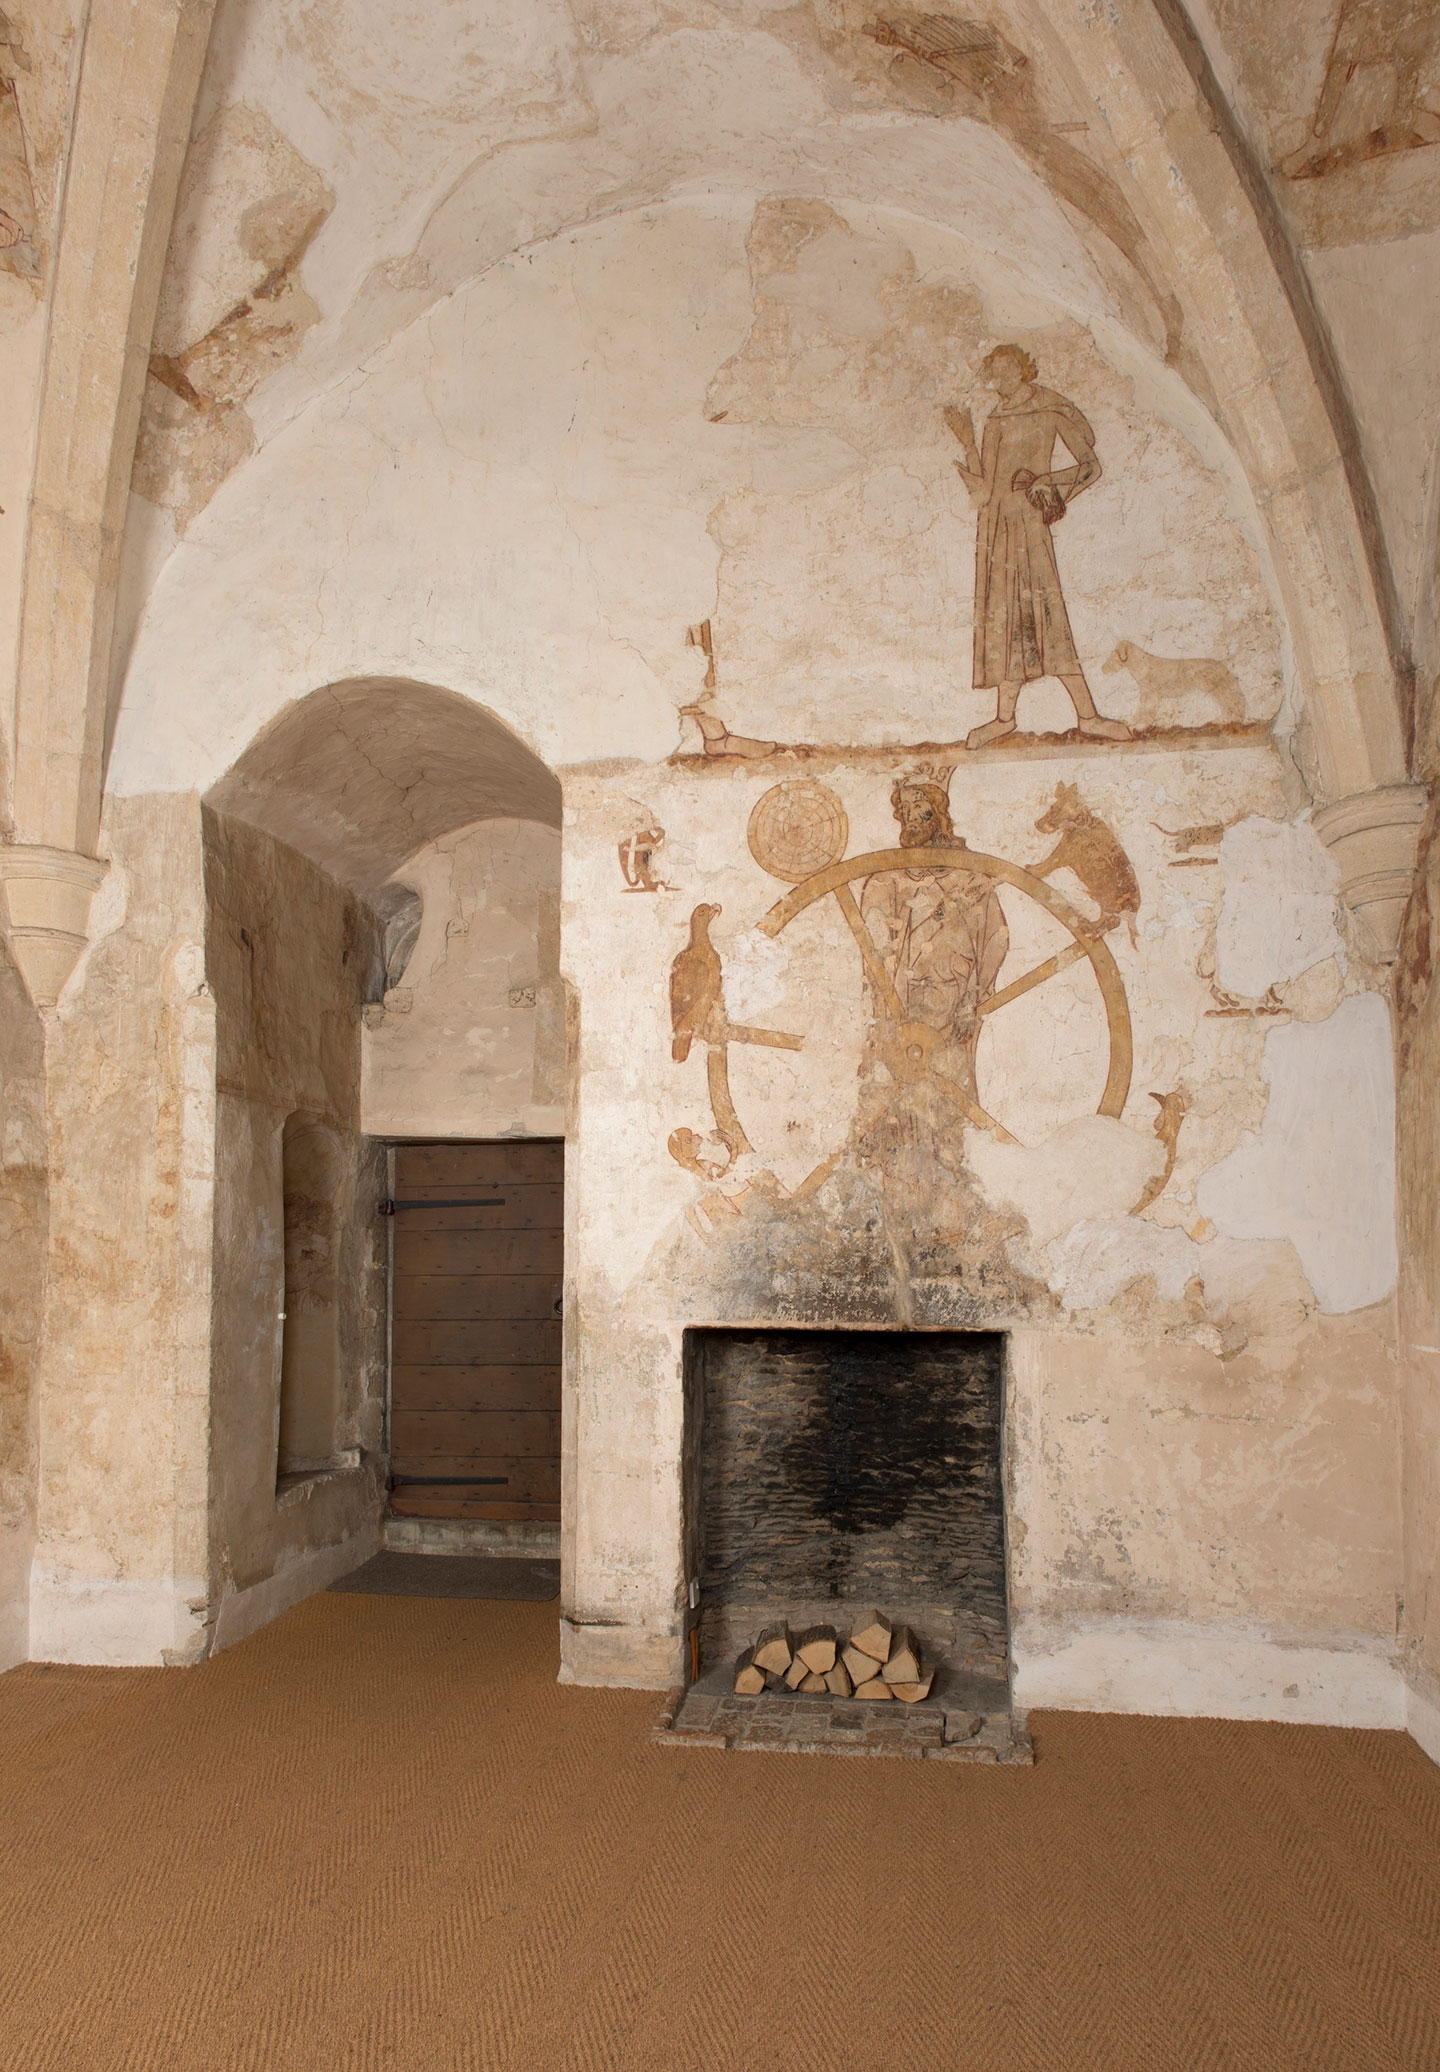 The 14th-century domestic paintings at Longthorpe Tower